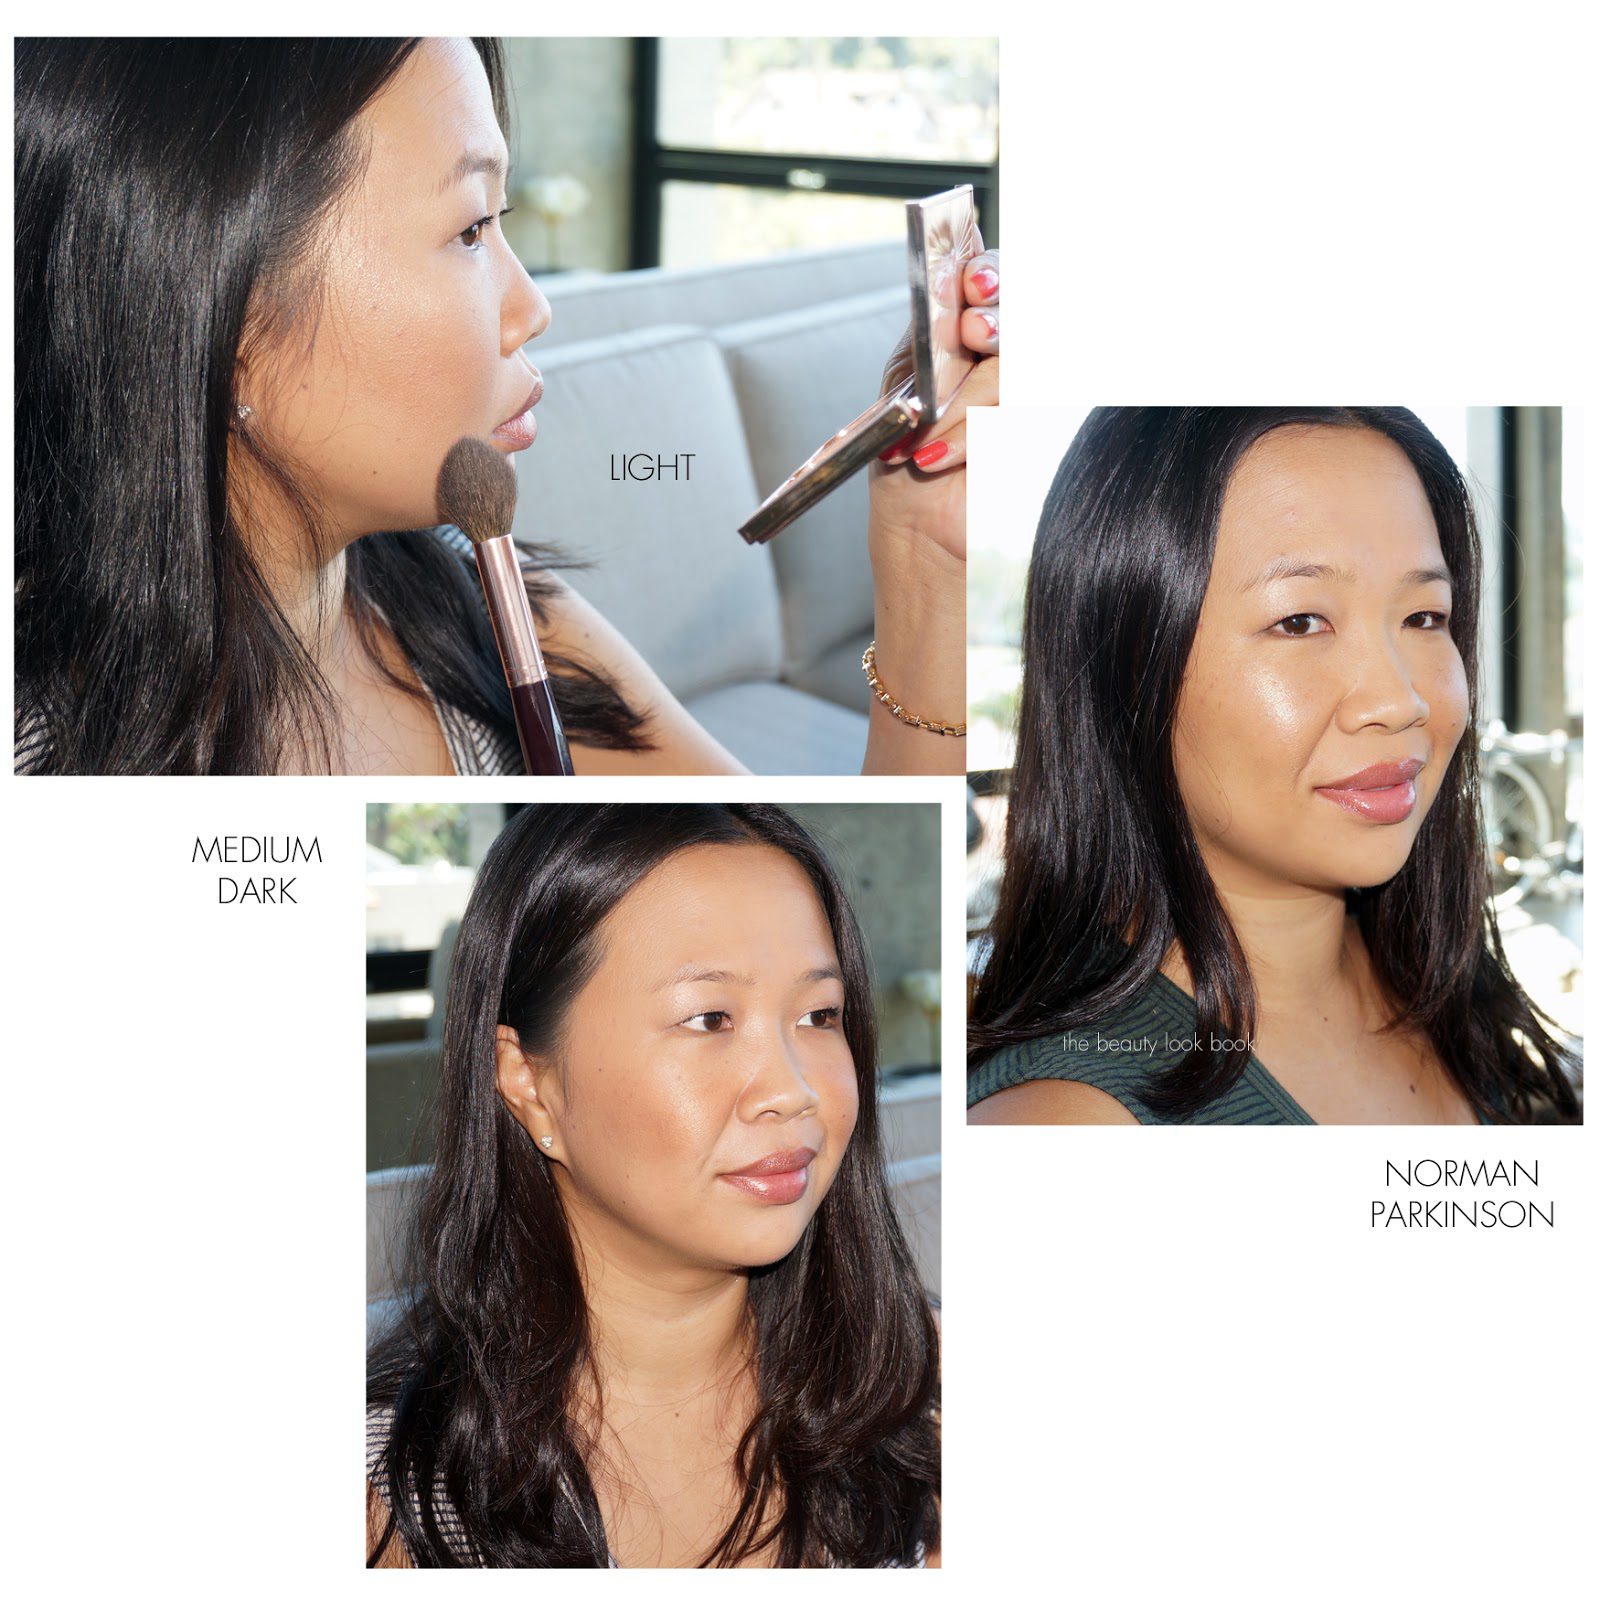 Charlotte Tilbury Beauty Archives - Page 10 of 15 - The Beauty Look Book